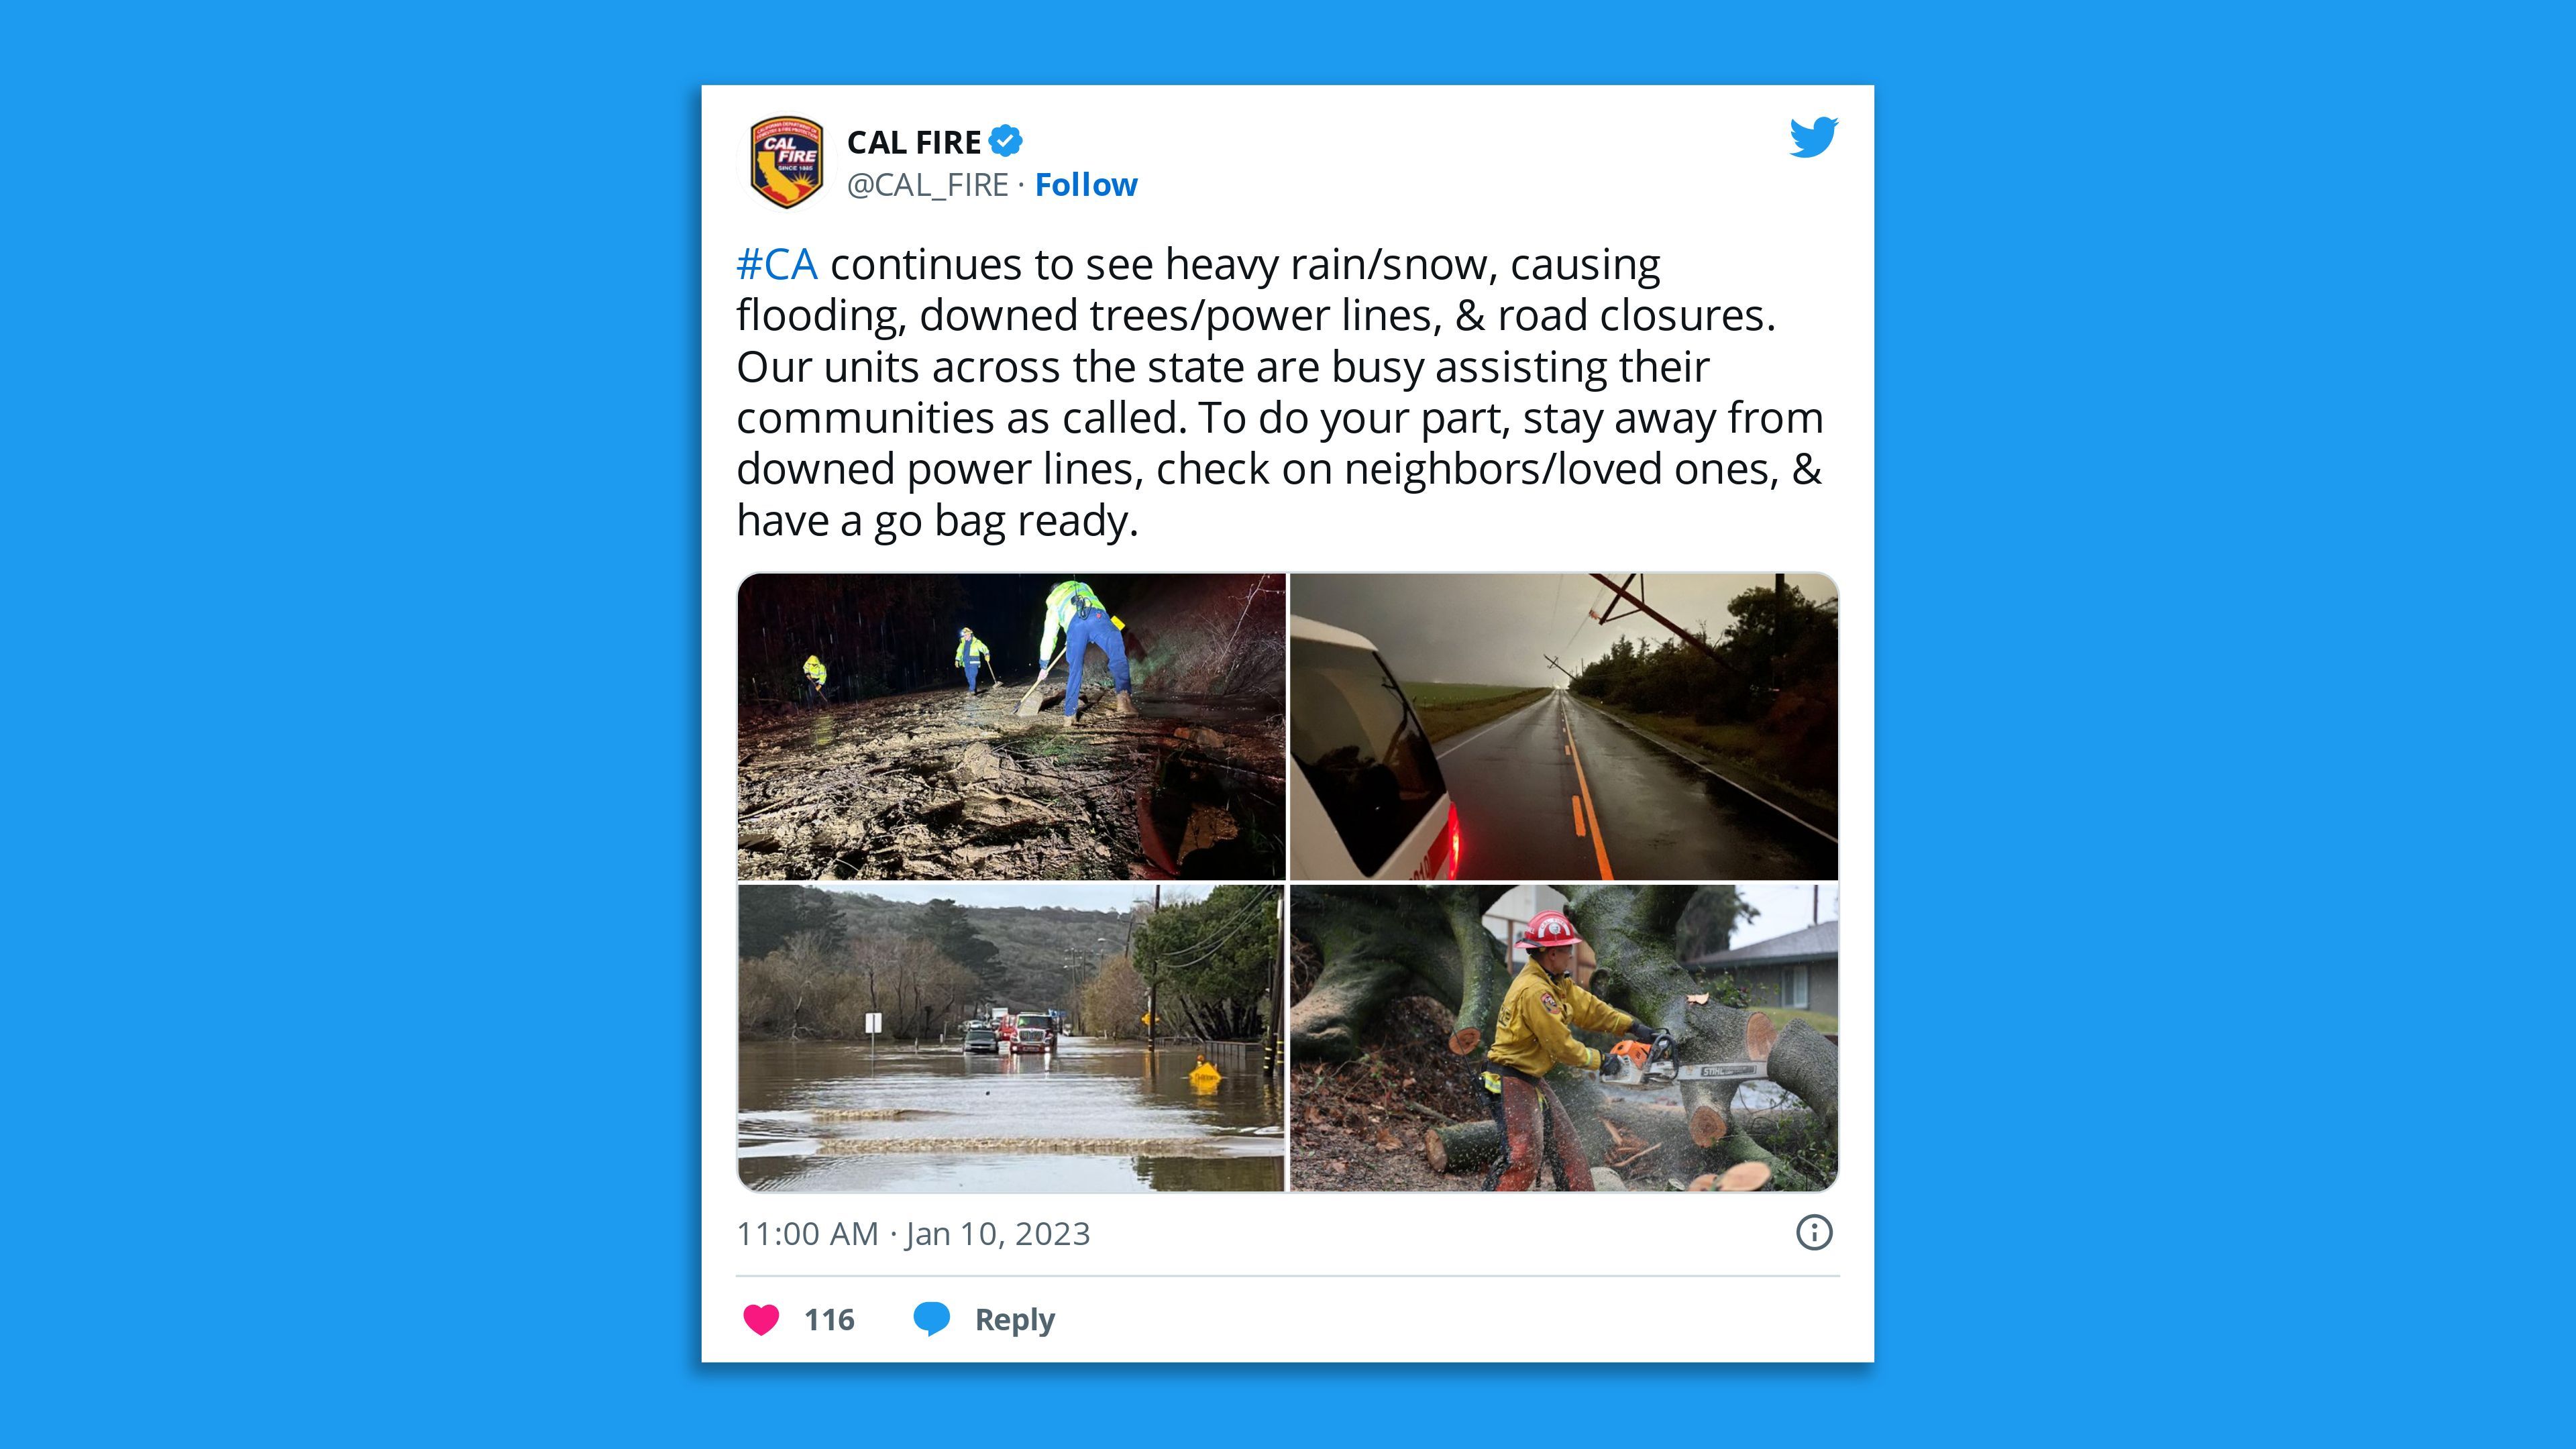 A screenshot of a Cal Fire photo tweet of the storm response, saying: " #CA continues to see heavy rain/snow, causing flooding, downed trees/power lines, & road closures"